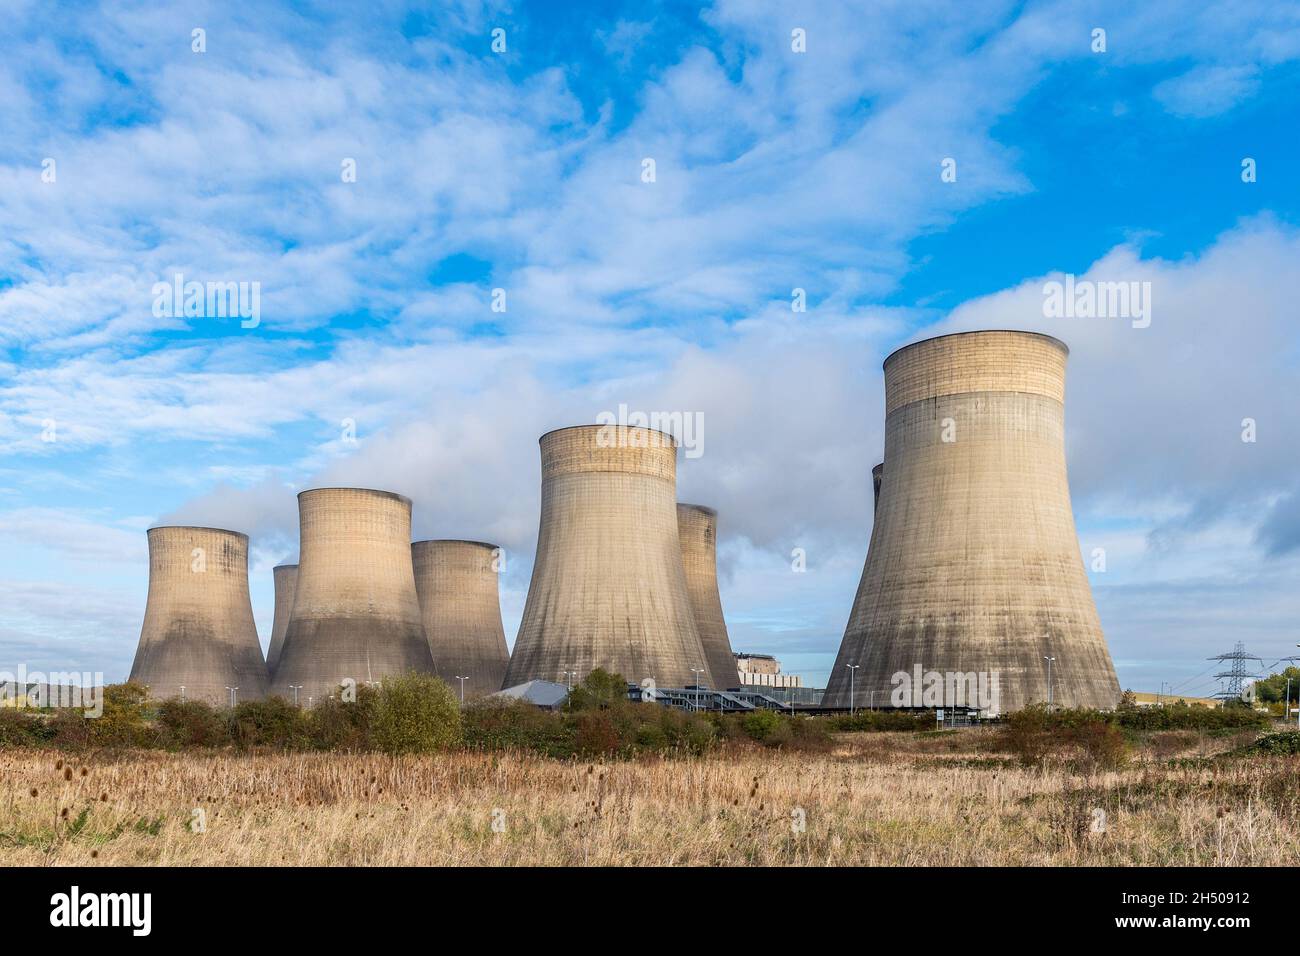 Ratcliffe on Soar. Nottingham, UK. 5th Nov, 2021. Ratcliffe Power Station was spewing out tons of emissions today. It comes as the COP26 summit is taking place in Glasgow, UK, where climate activist Greta Thunberg led thousands of young people in a protest calling for action on climate change. Credit: AG News/Alamy Live News Stock Photo